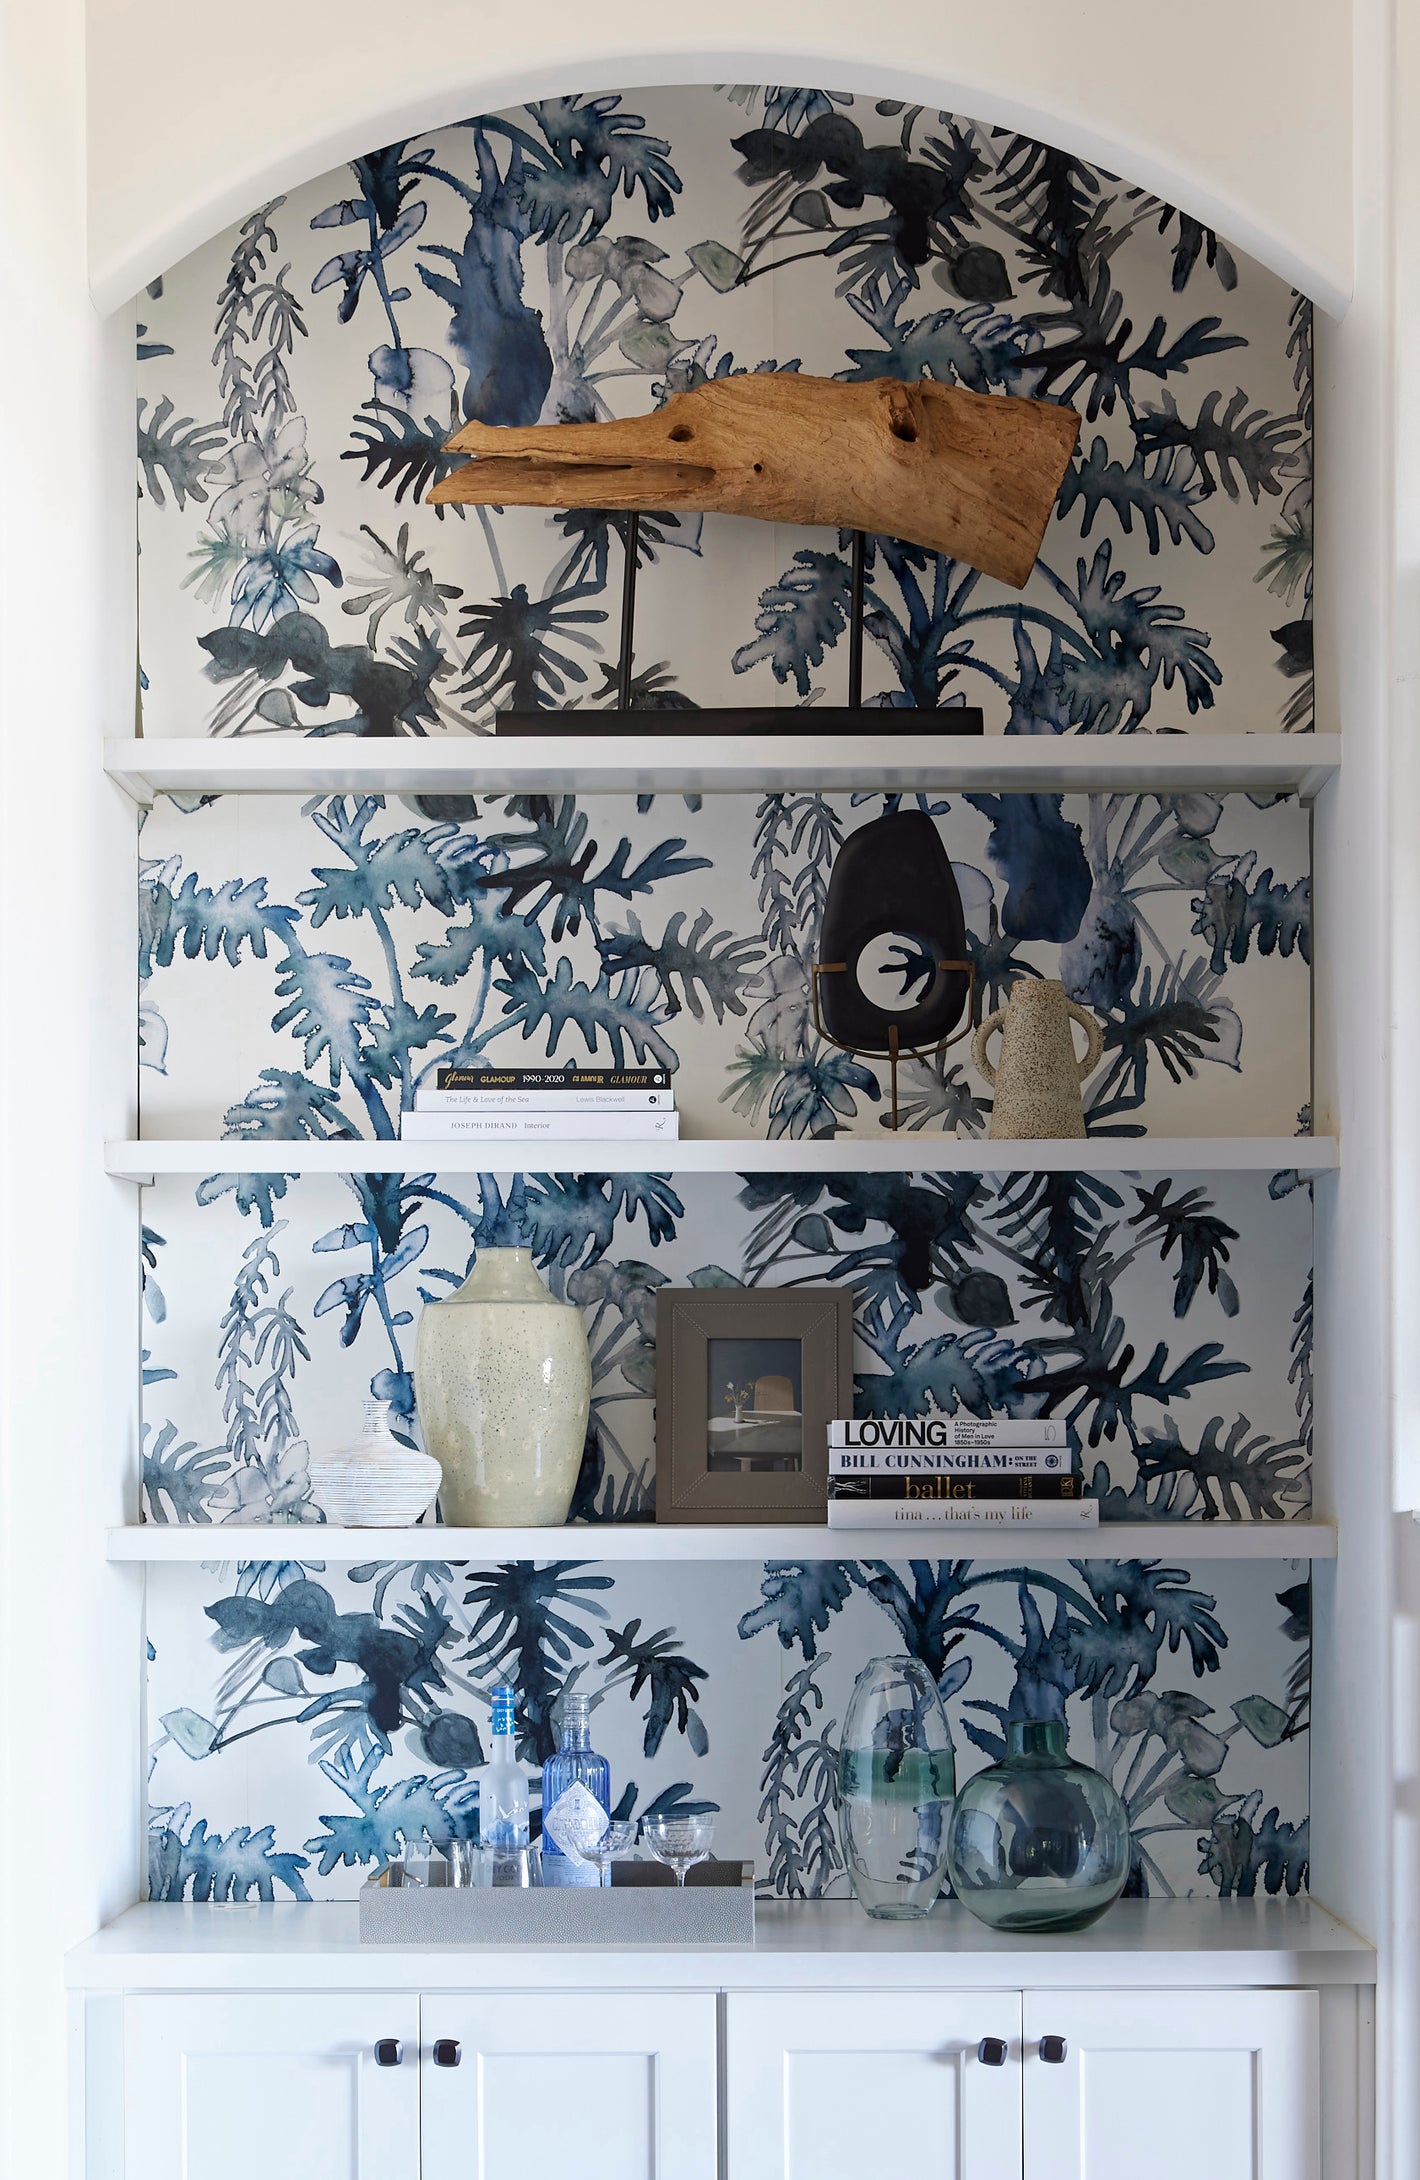 Our Topiary Wallpaper in Indigo with a botanical pattern in blue hues is installed as the backdrop of a shelf.